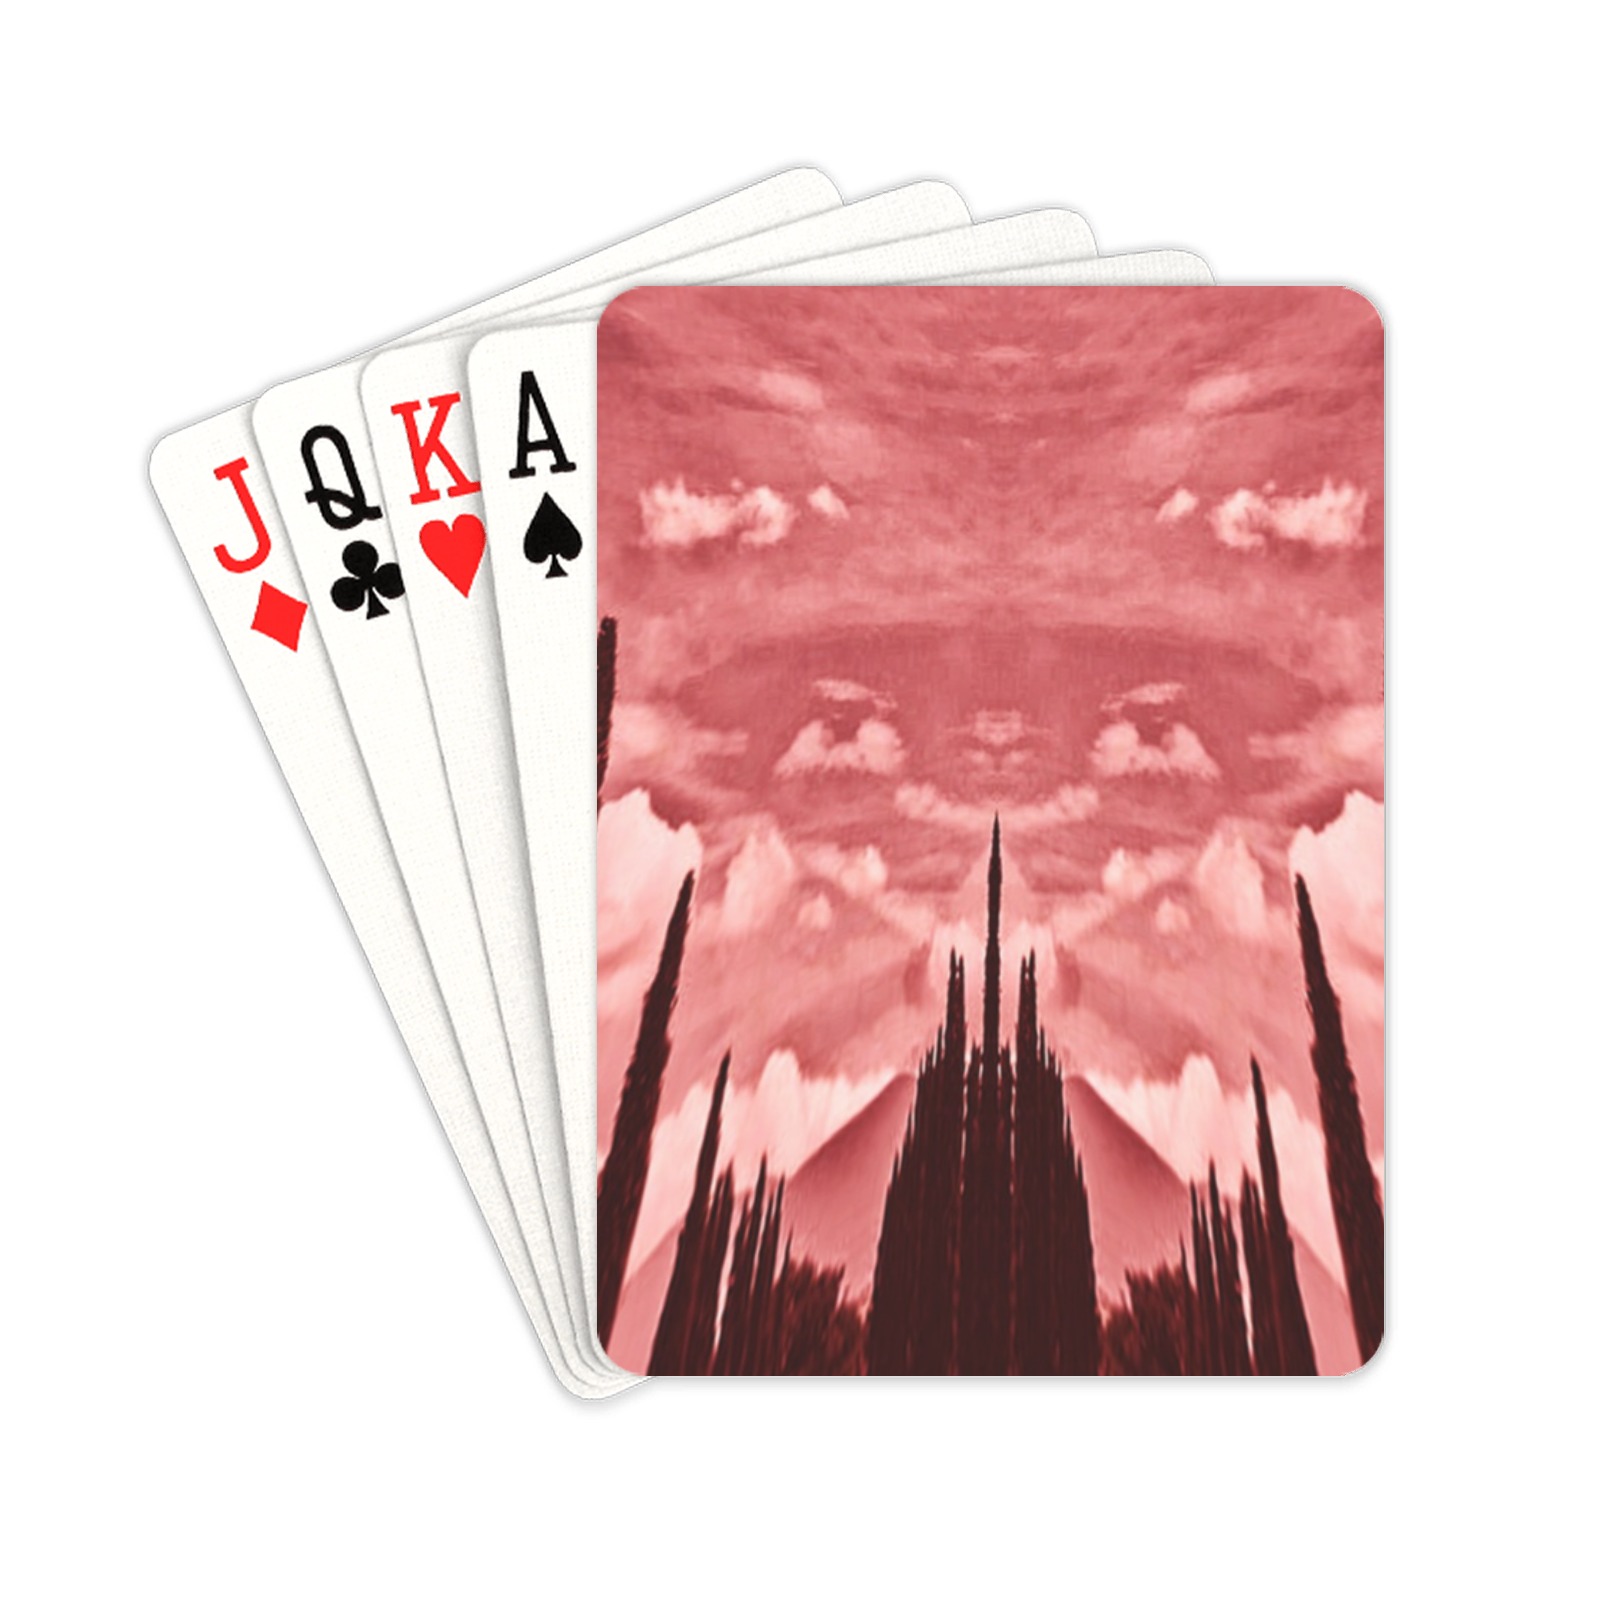 martian landscape in the future Playing Cards 2.5"x3.5"